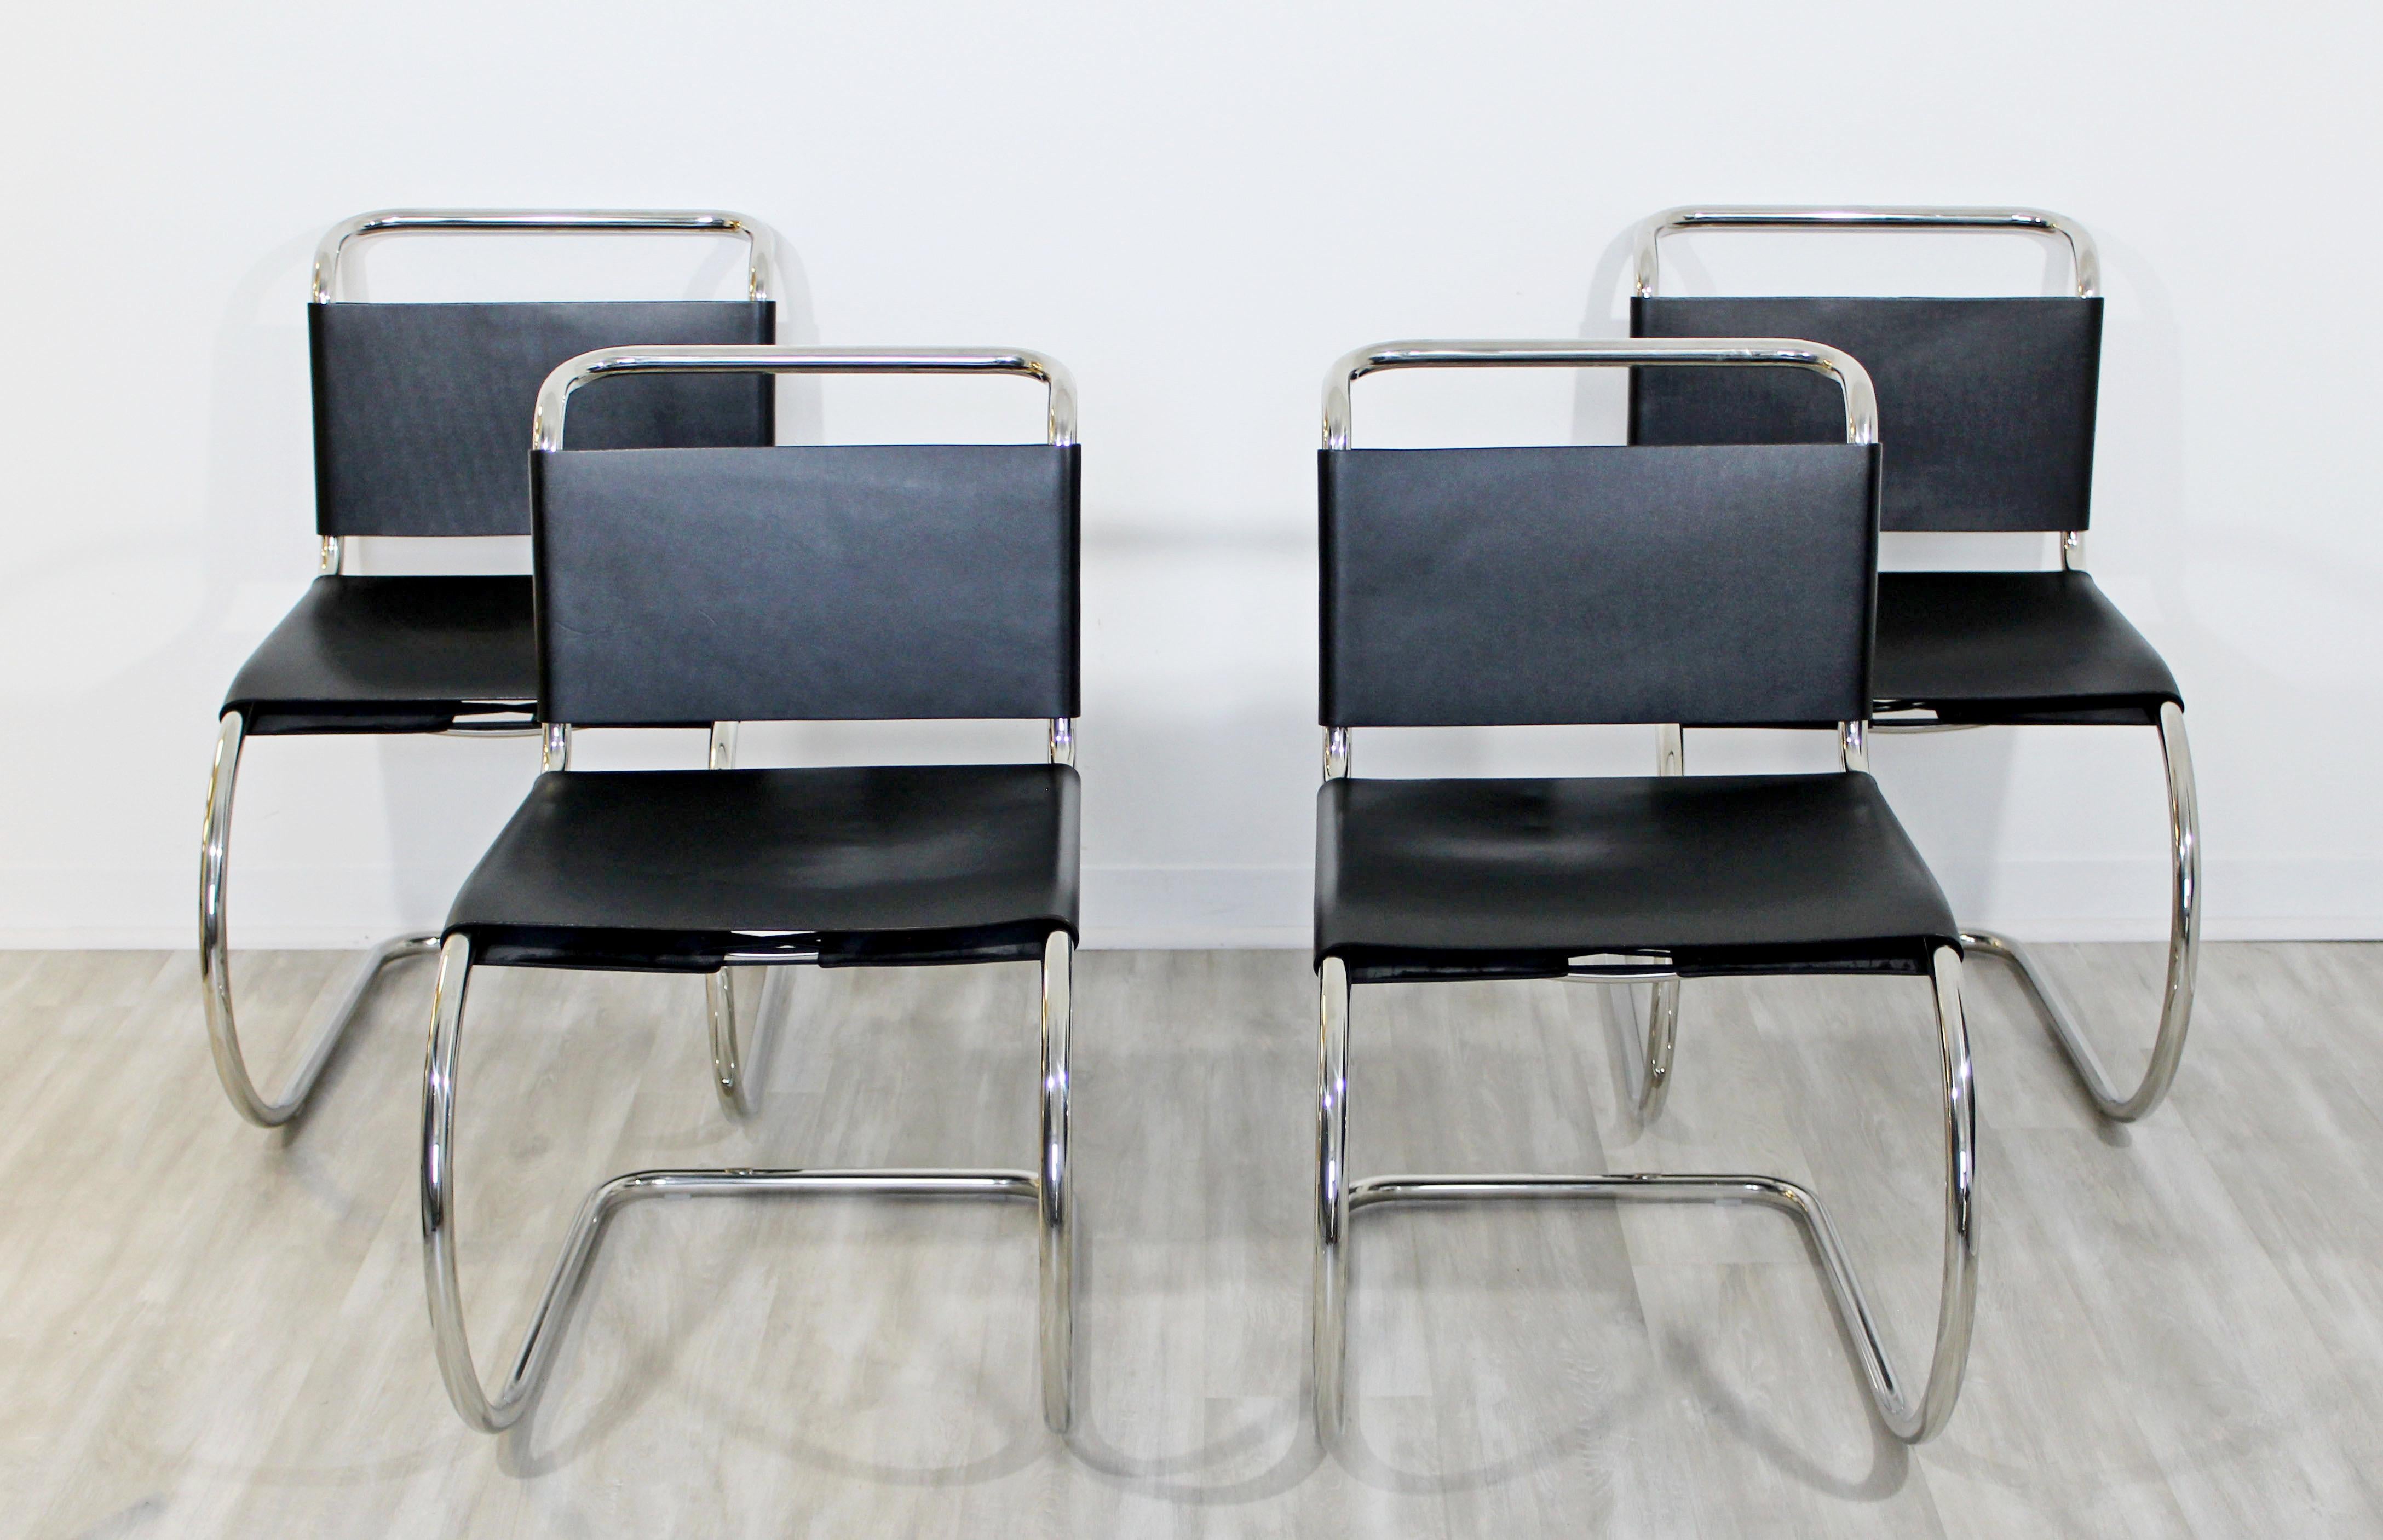 For your consideration is a wonderful set of four MR cantilever chrome side dining chairs, by Mies van der Rohe for Knoll, circa 1970s. In excellent condition. The dimensions are 19